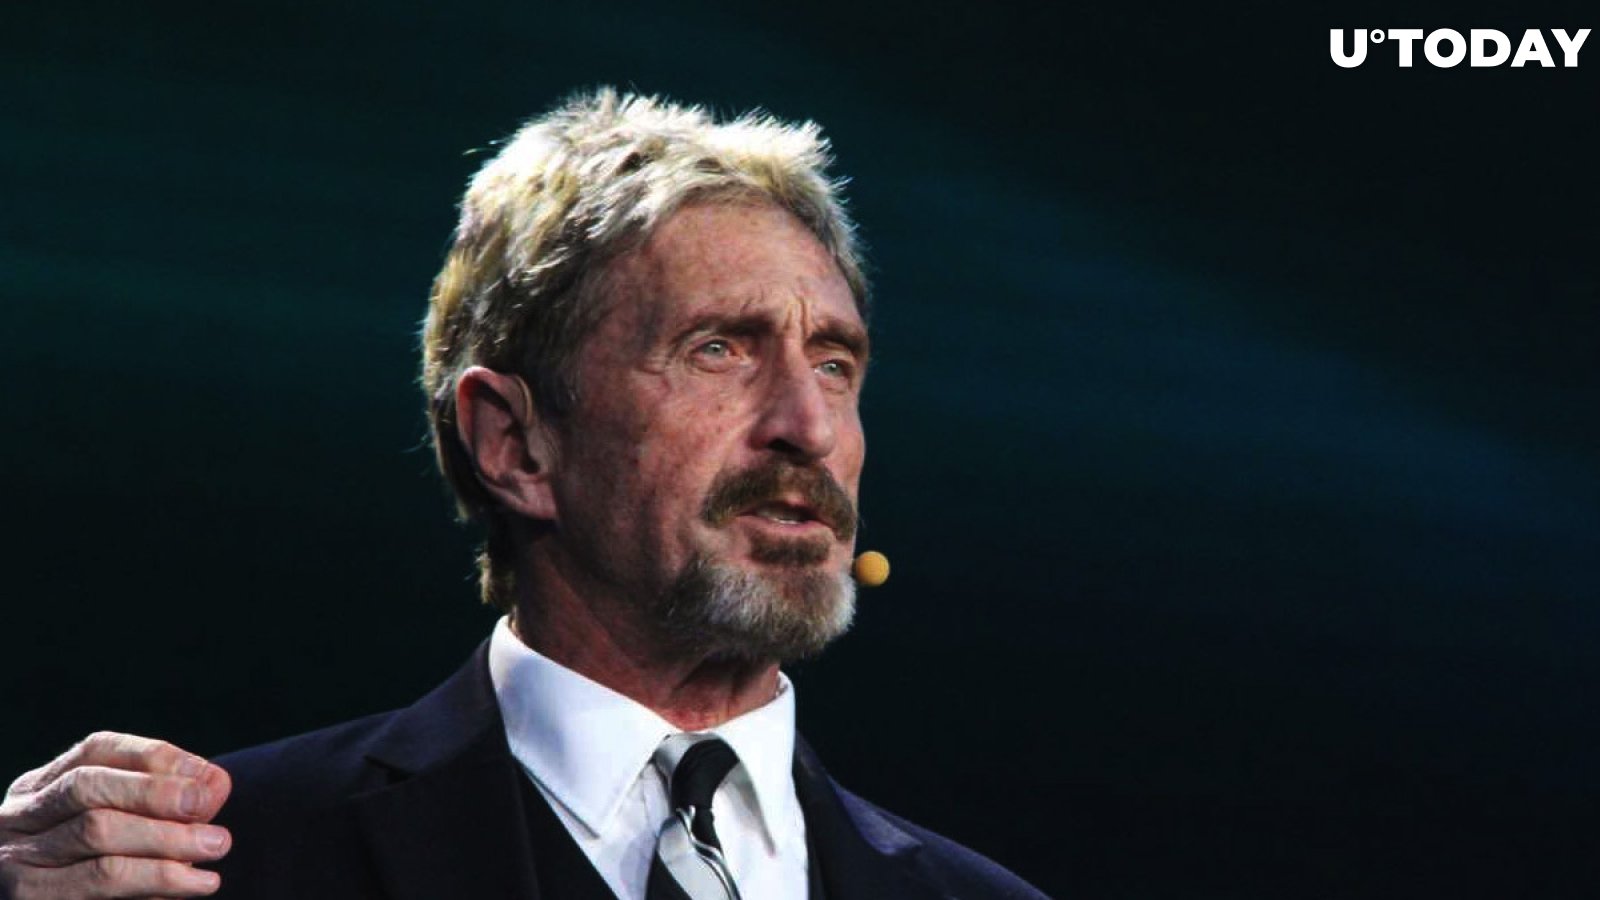 John McAfee Promises to Make Your Smartphone Untrackable with His Ghost Coin